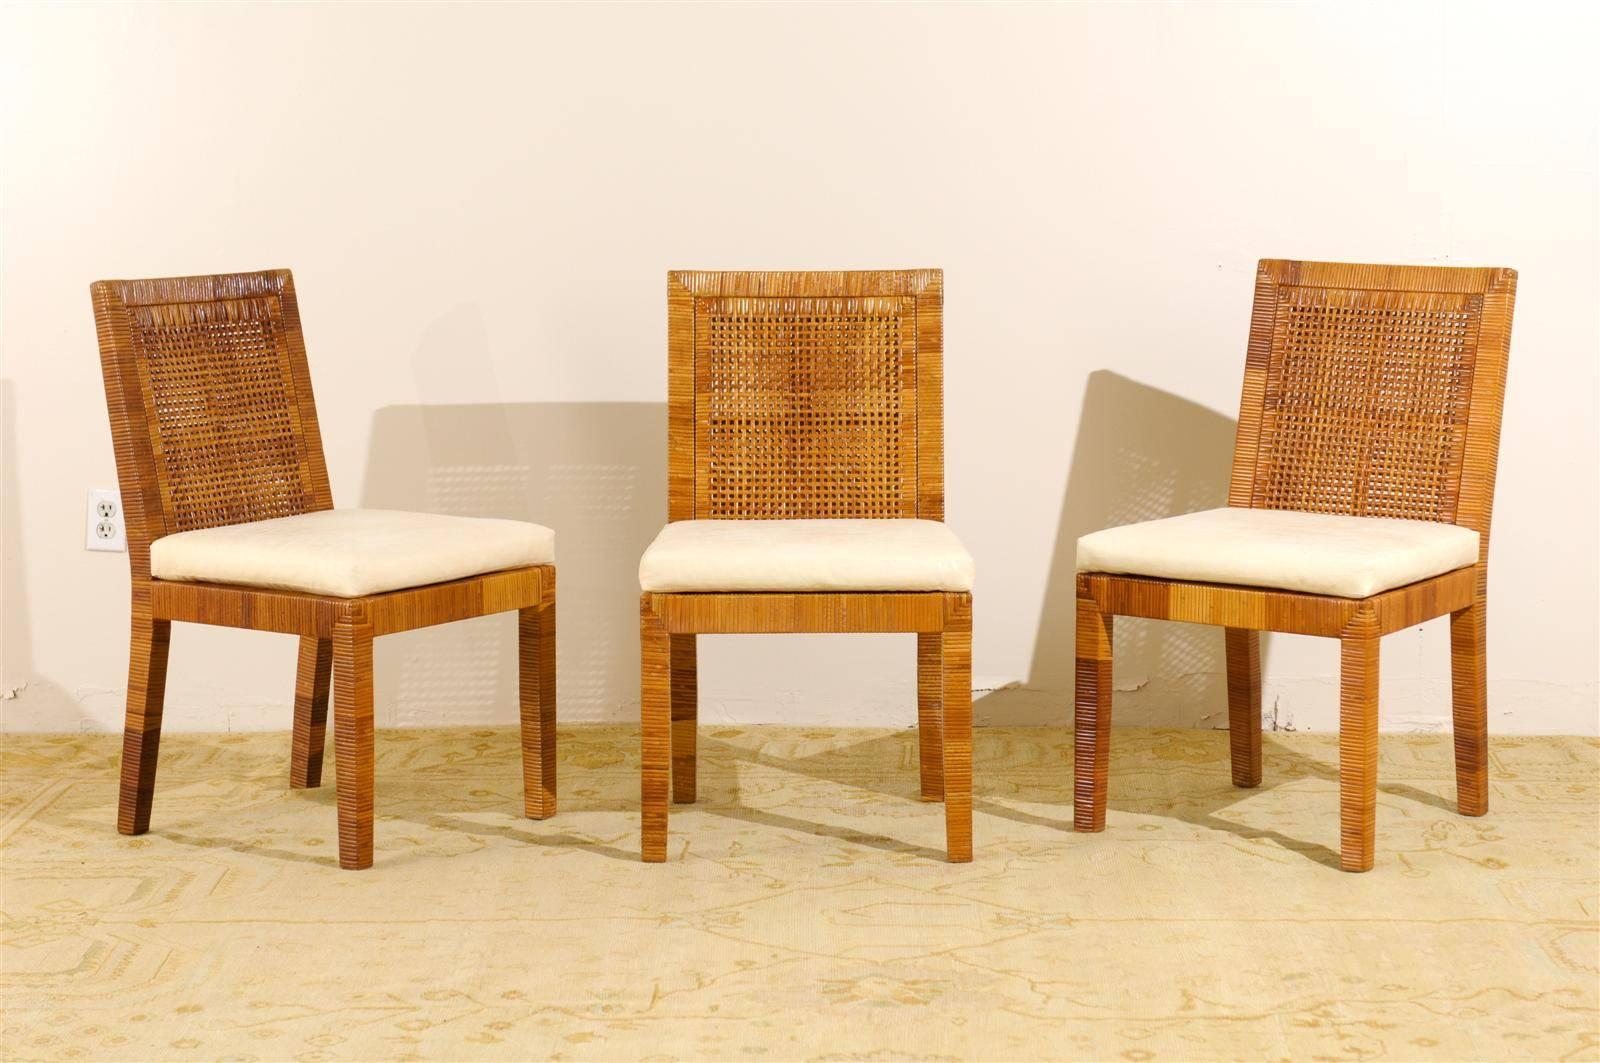 A fabulous set of six ( 6 ) cane back Parsons style dining chairs, circa 1970.  Stout hardwood frame wrapped in rattan.  Veneer displays stunning color range, patina and depth.  Fine, beautifully made pieces.  Excellent Restored Condition.  The